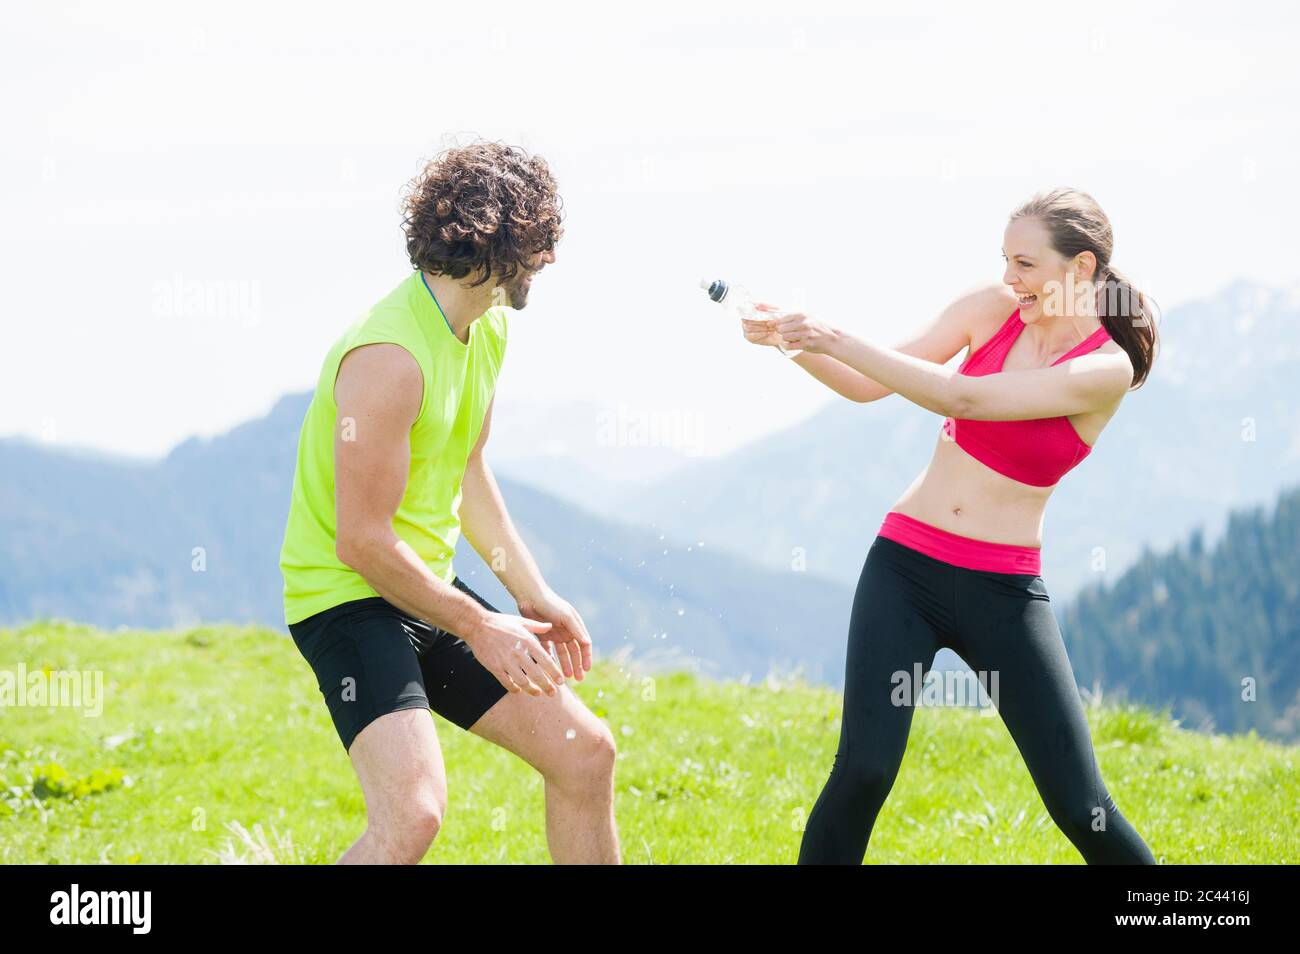 Female jogger squirting water to man, Wallberg, Bavaria, Germany Stock Photo